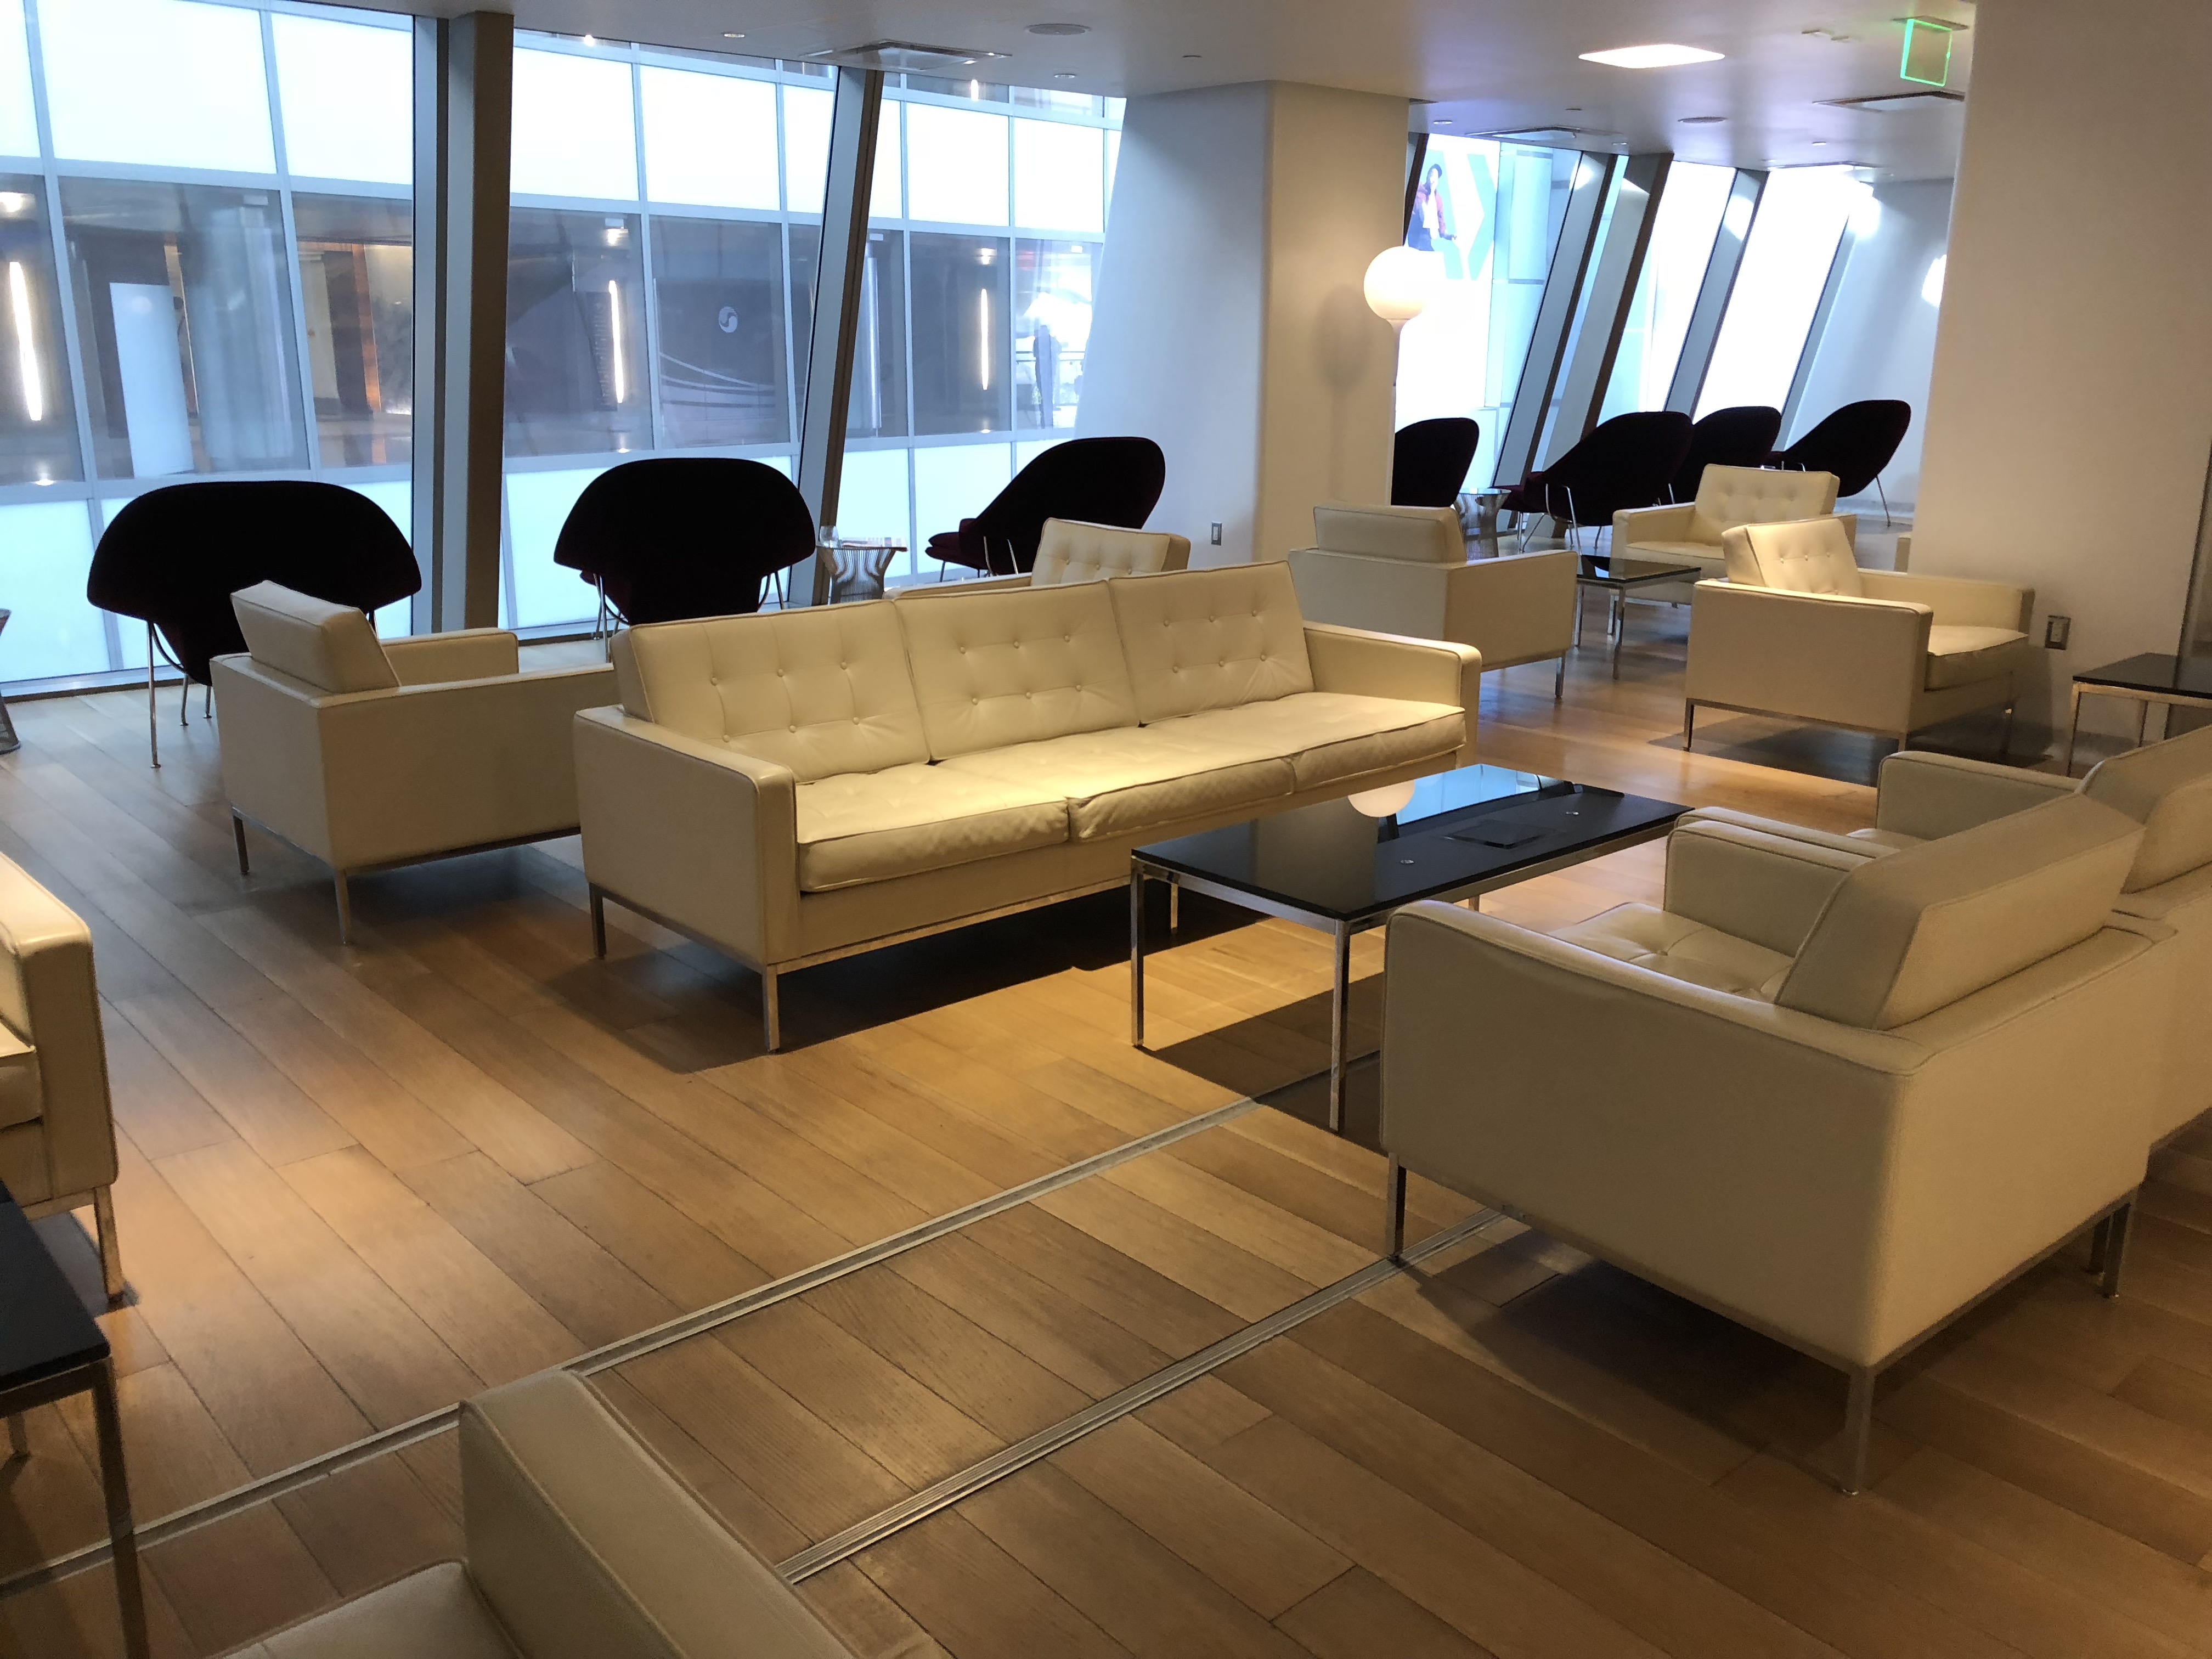 Qantas First Class Lounge LAX Lounge Chairs and Couches